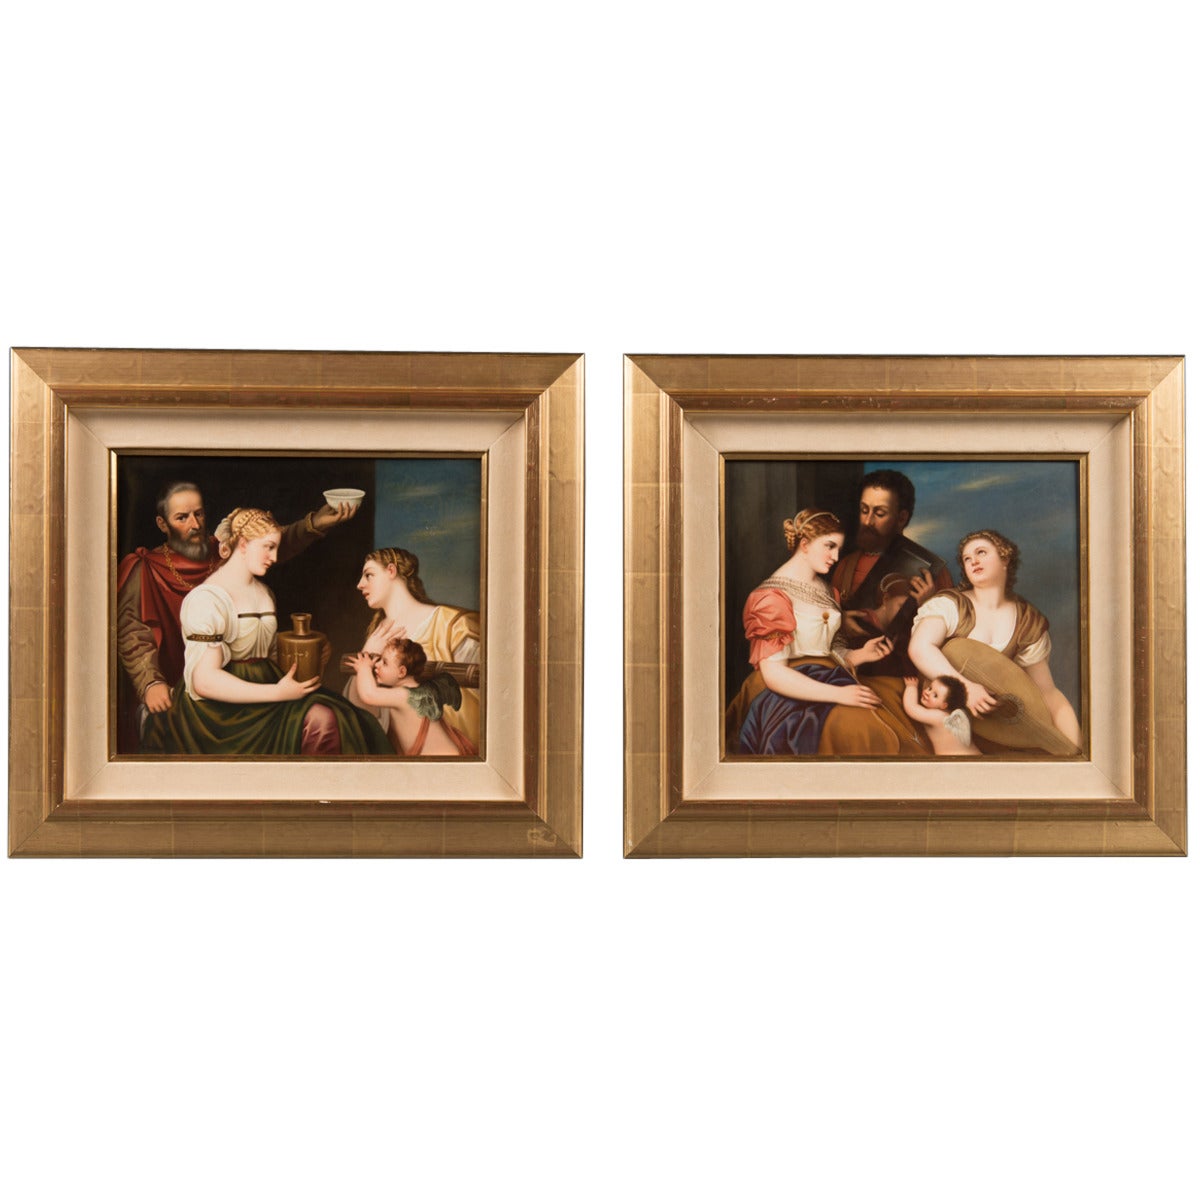 A Pair of German K.P.M Porcelain Plaques Depicting "Aligira and Tirian" For Sale